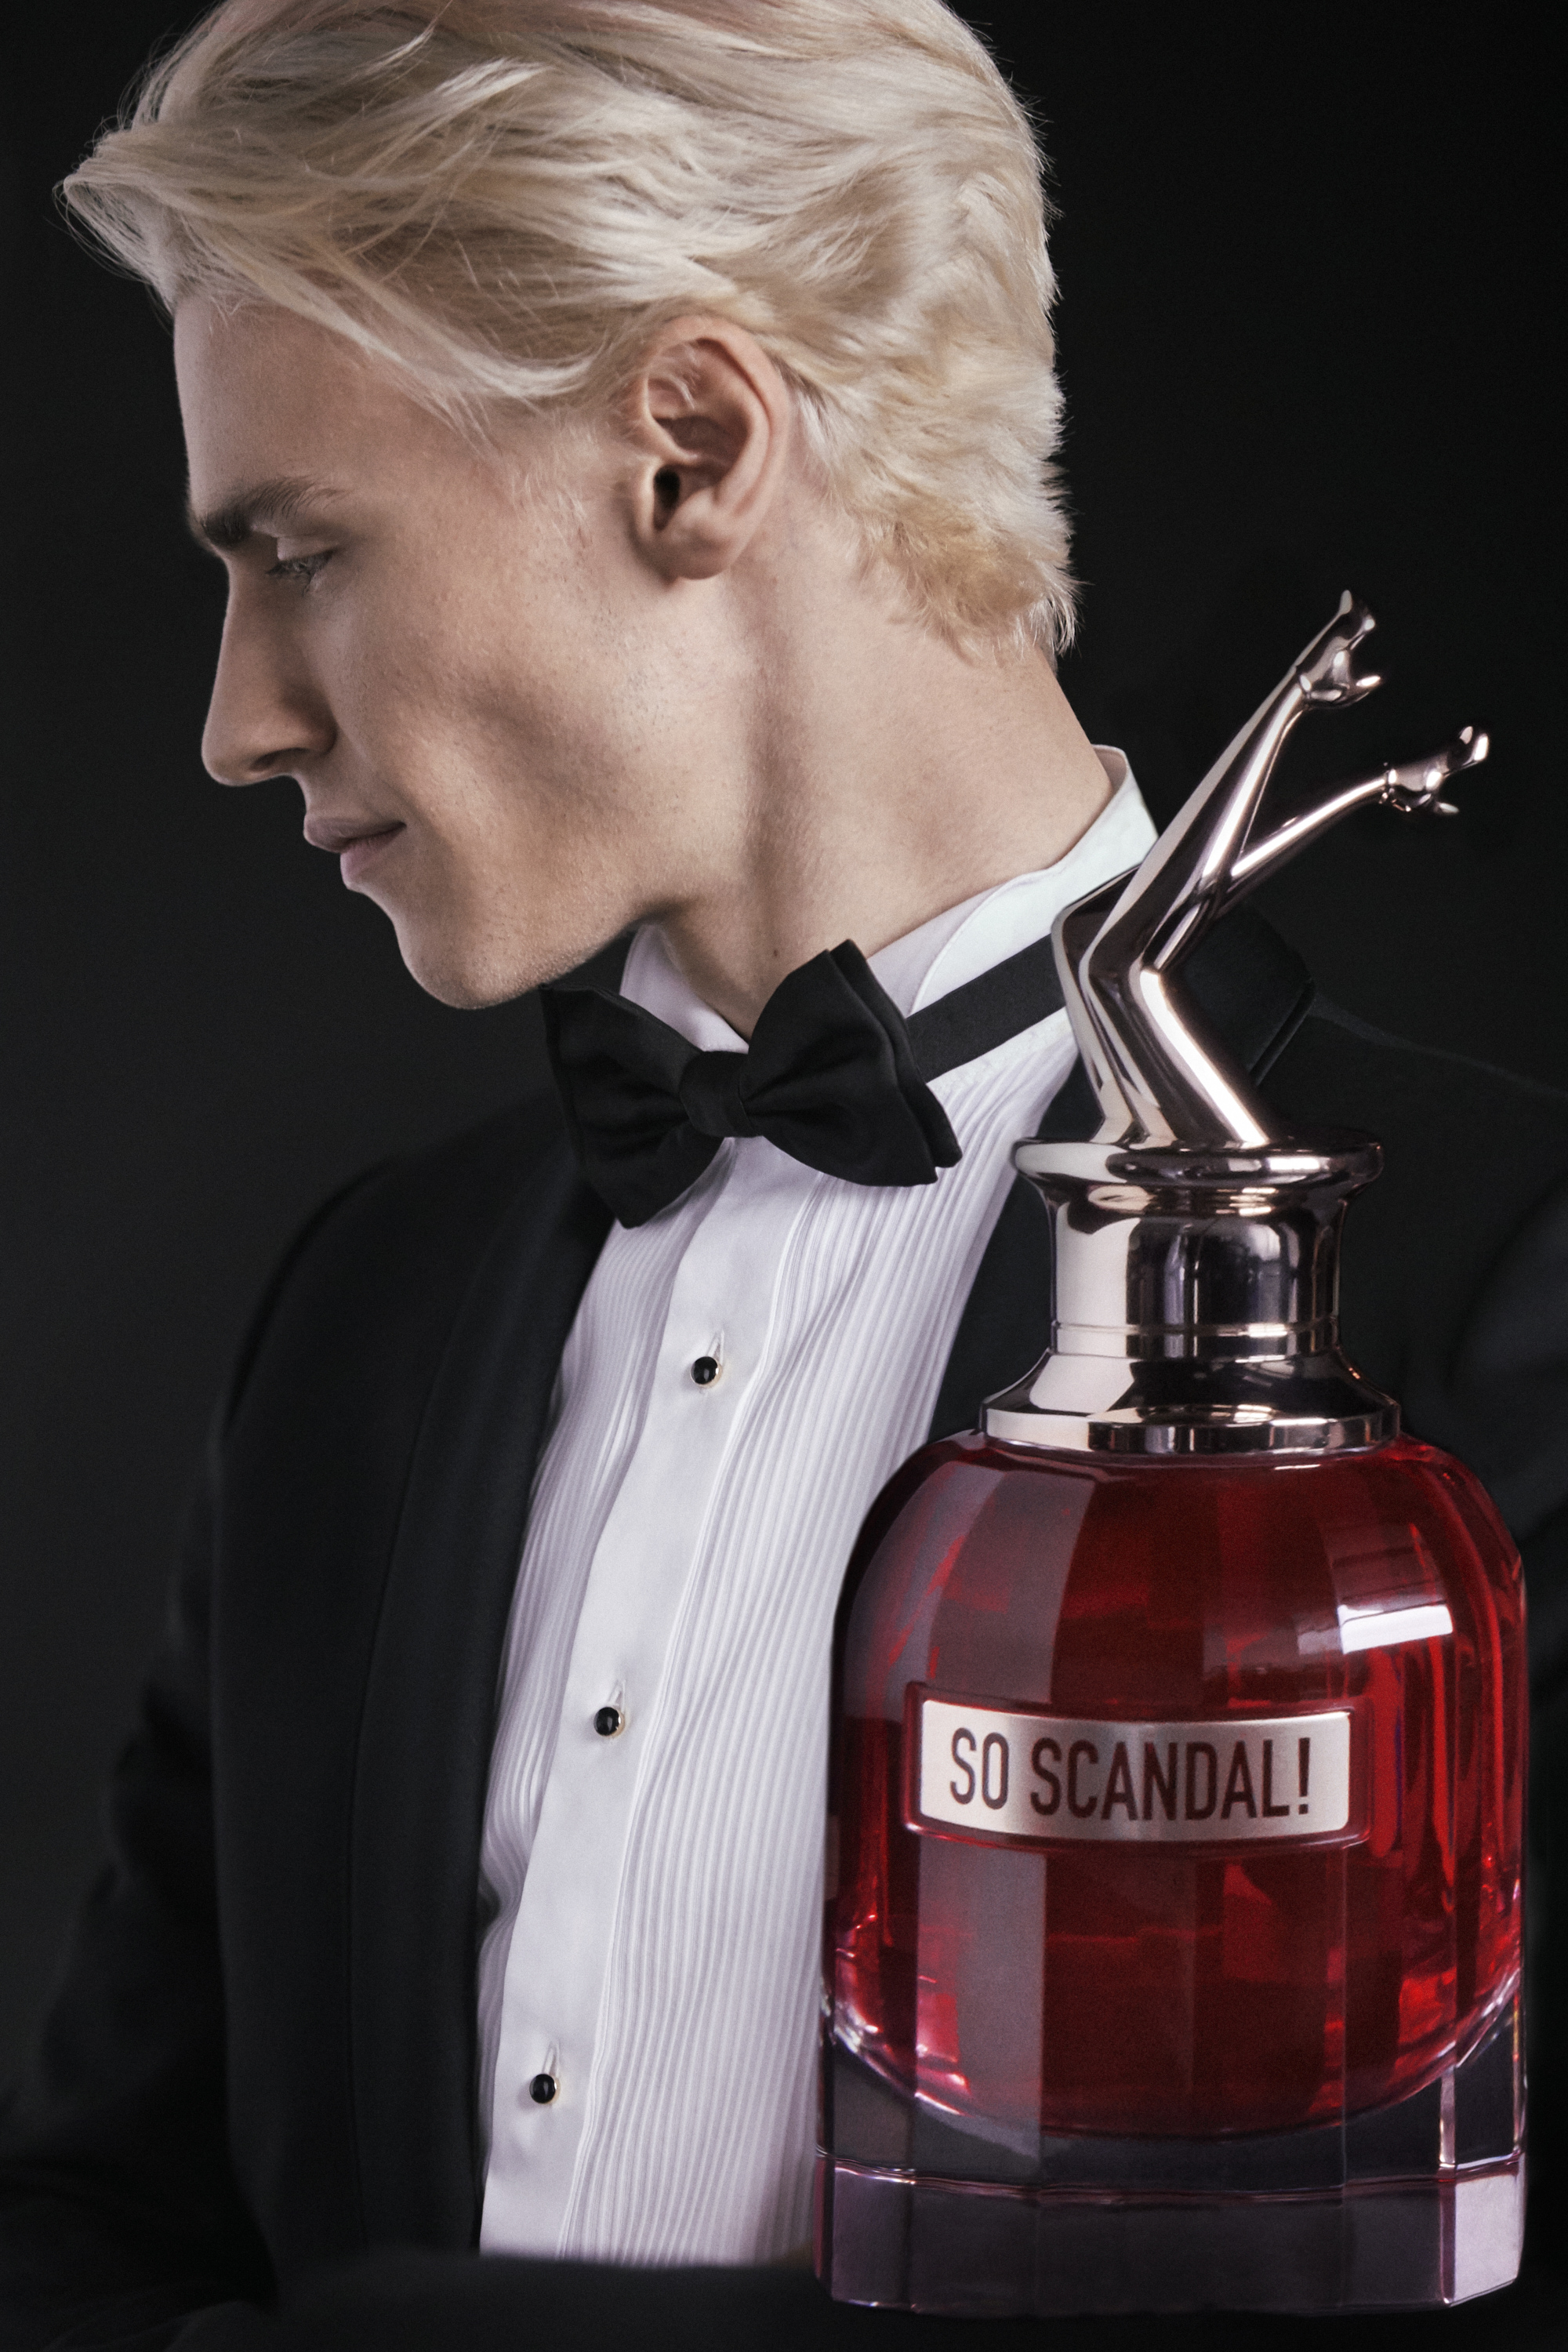 Gaultier scandal pour homme. Парфюм so scandal Jean Paul Gaultier. Jean Paul Gaultier scandal EDP 80ml reklama. Jean Paul Gaultier скандал. Scandal Jean Paul Gaultier мужские.